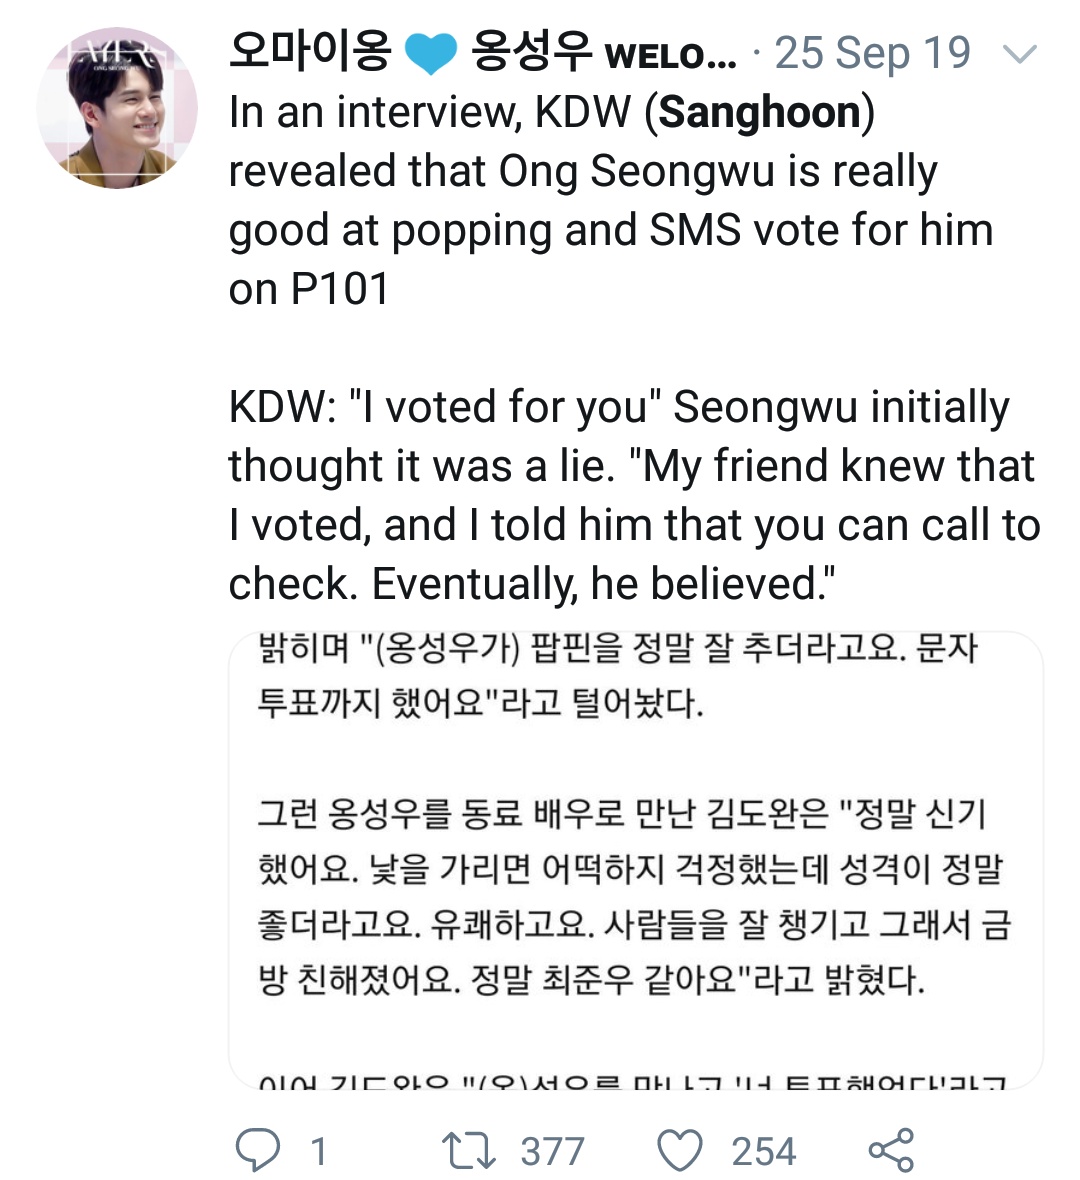 ●kim dowan (sanghoon)"dowan voted for ong during pd101""personality is good""takes care of others well" #AtEighteen  #열여덟의순간